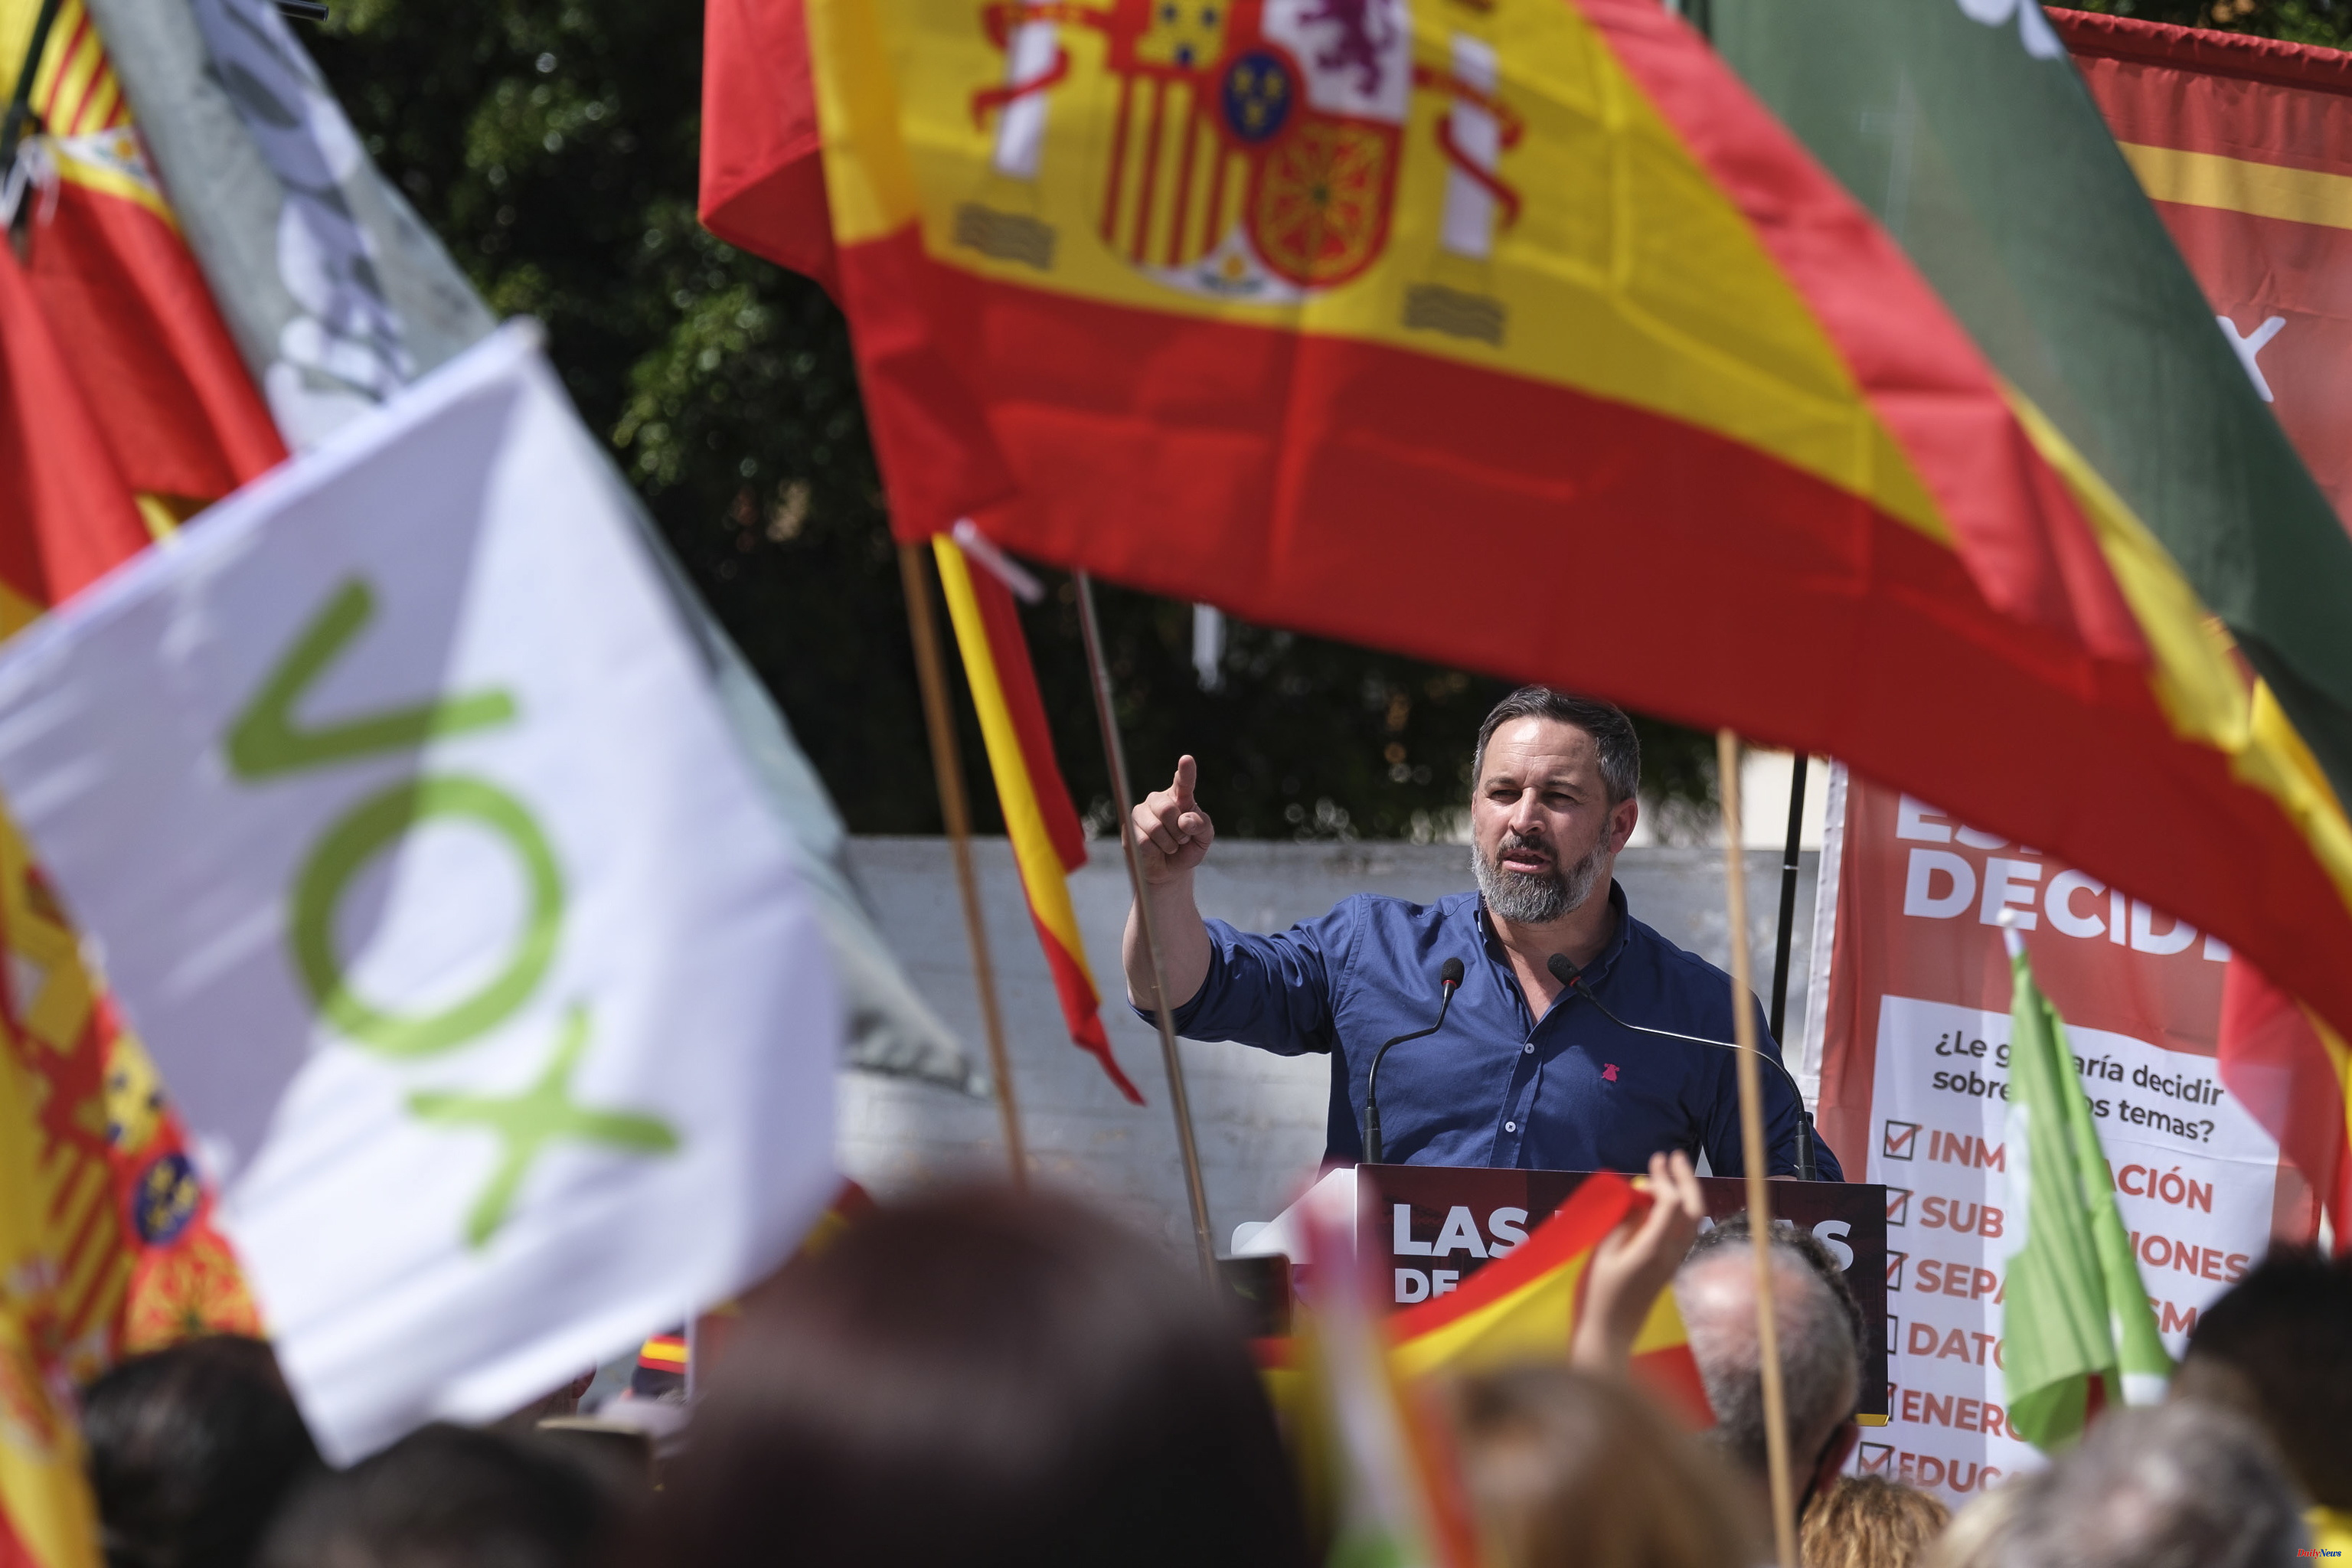 Politics Abascal criticizes the new parity law and urges Sánchez to "perceive herself as a lady" thanks to the trans law